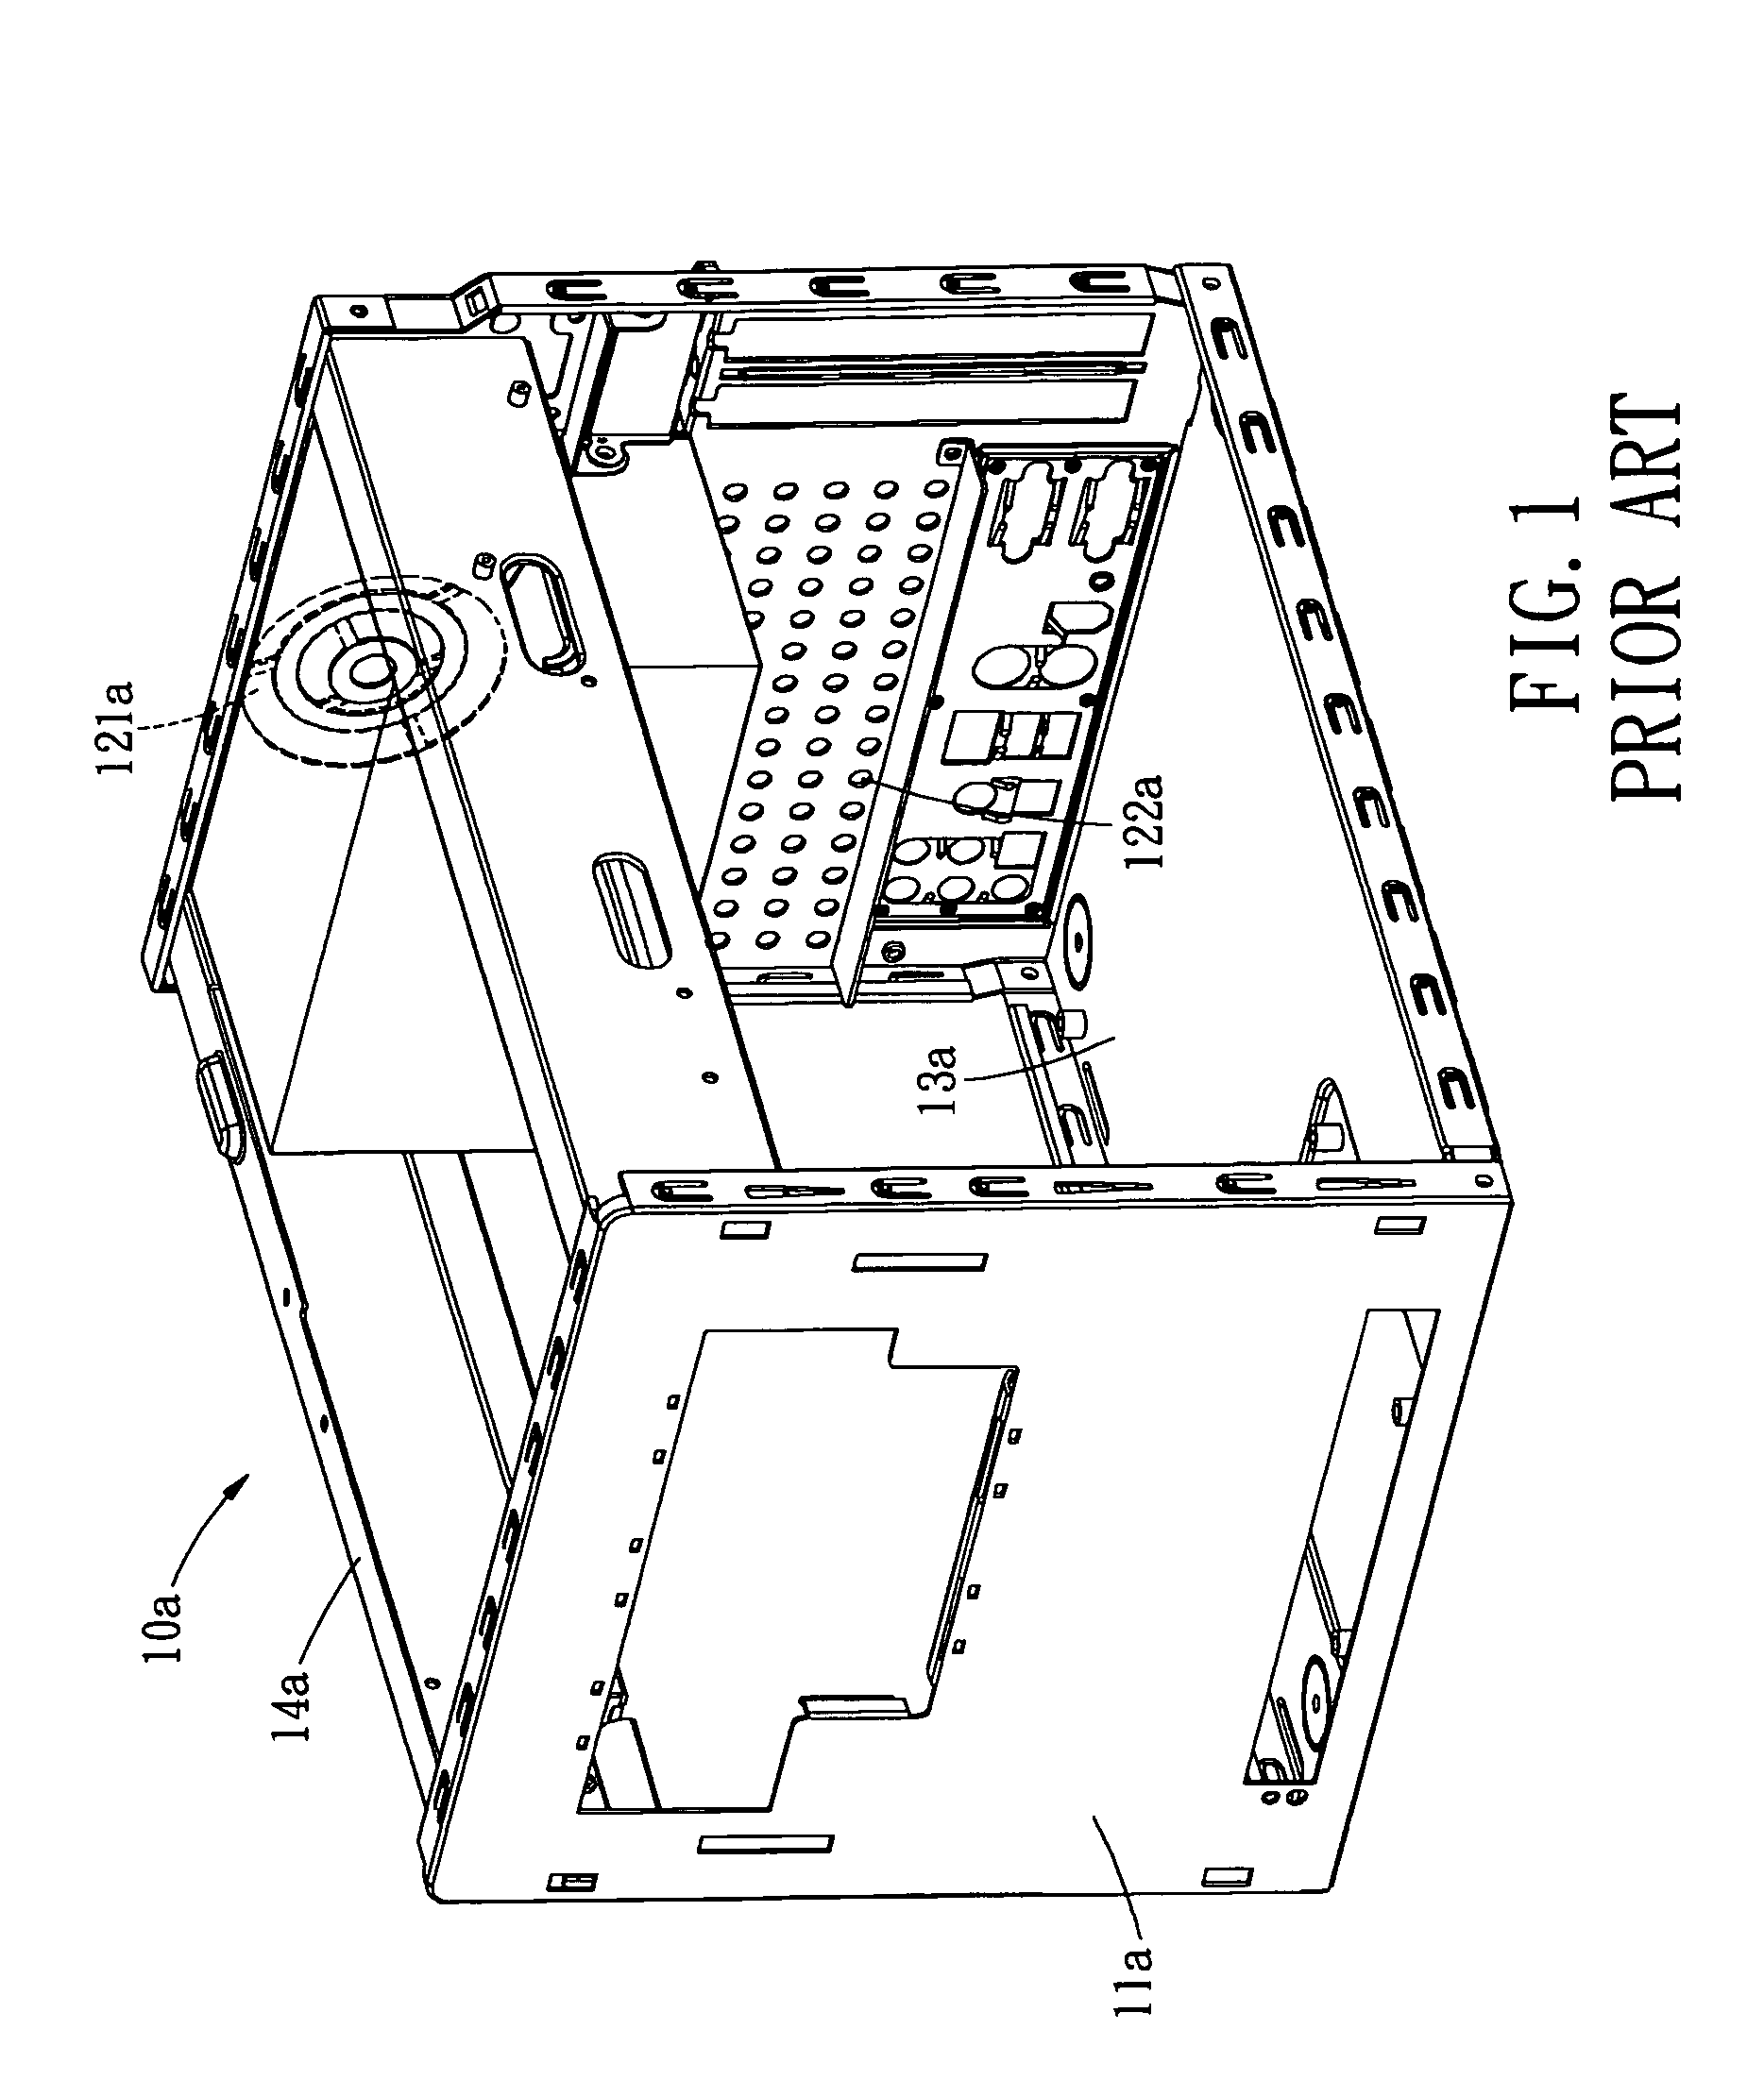 Heat dissipating structure for computer casing